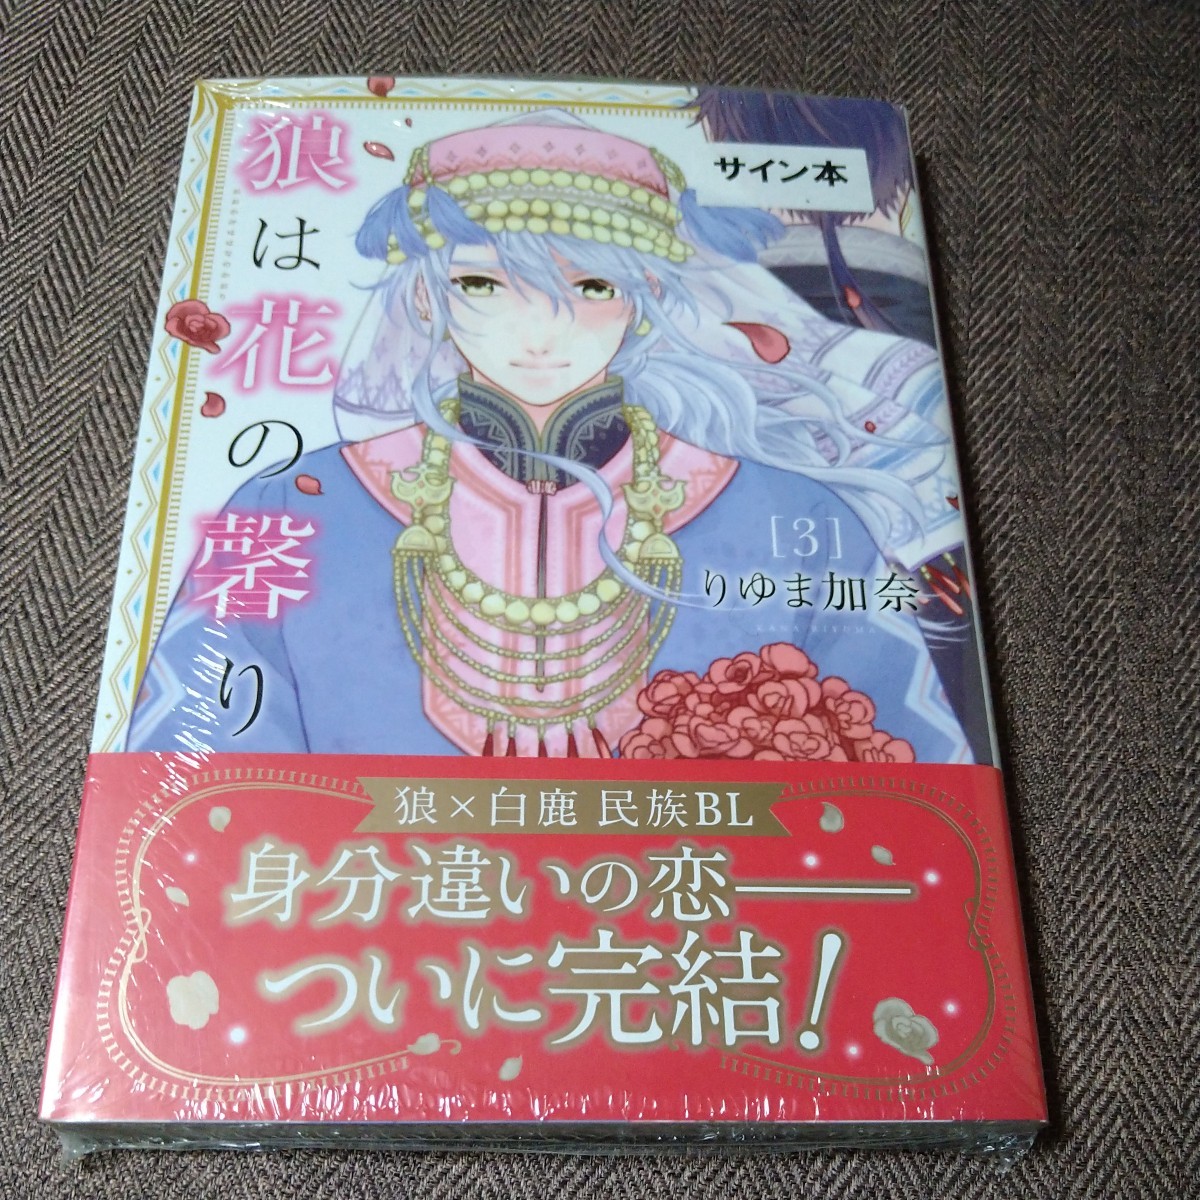 Autographed book with illustrations Wolf is the scent of flowers 3 by Kana Riyuma, Book, magazine, comics, Comics, Boys Love